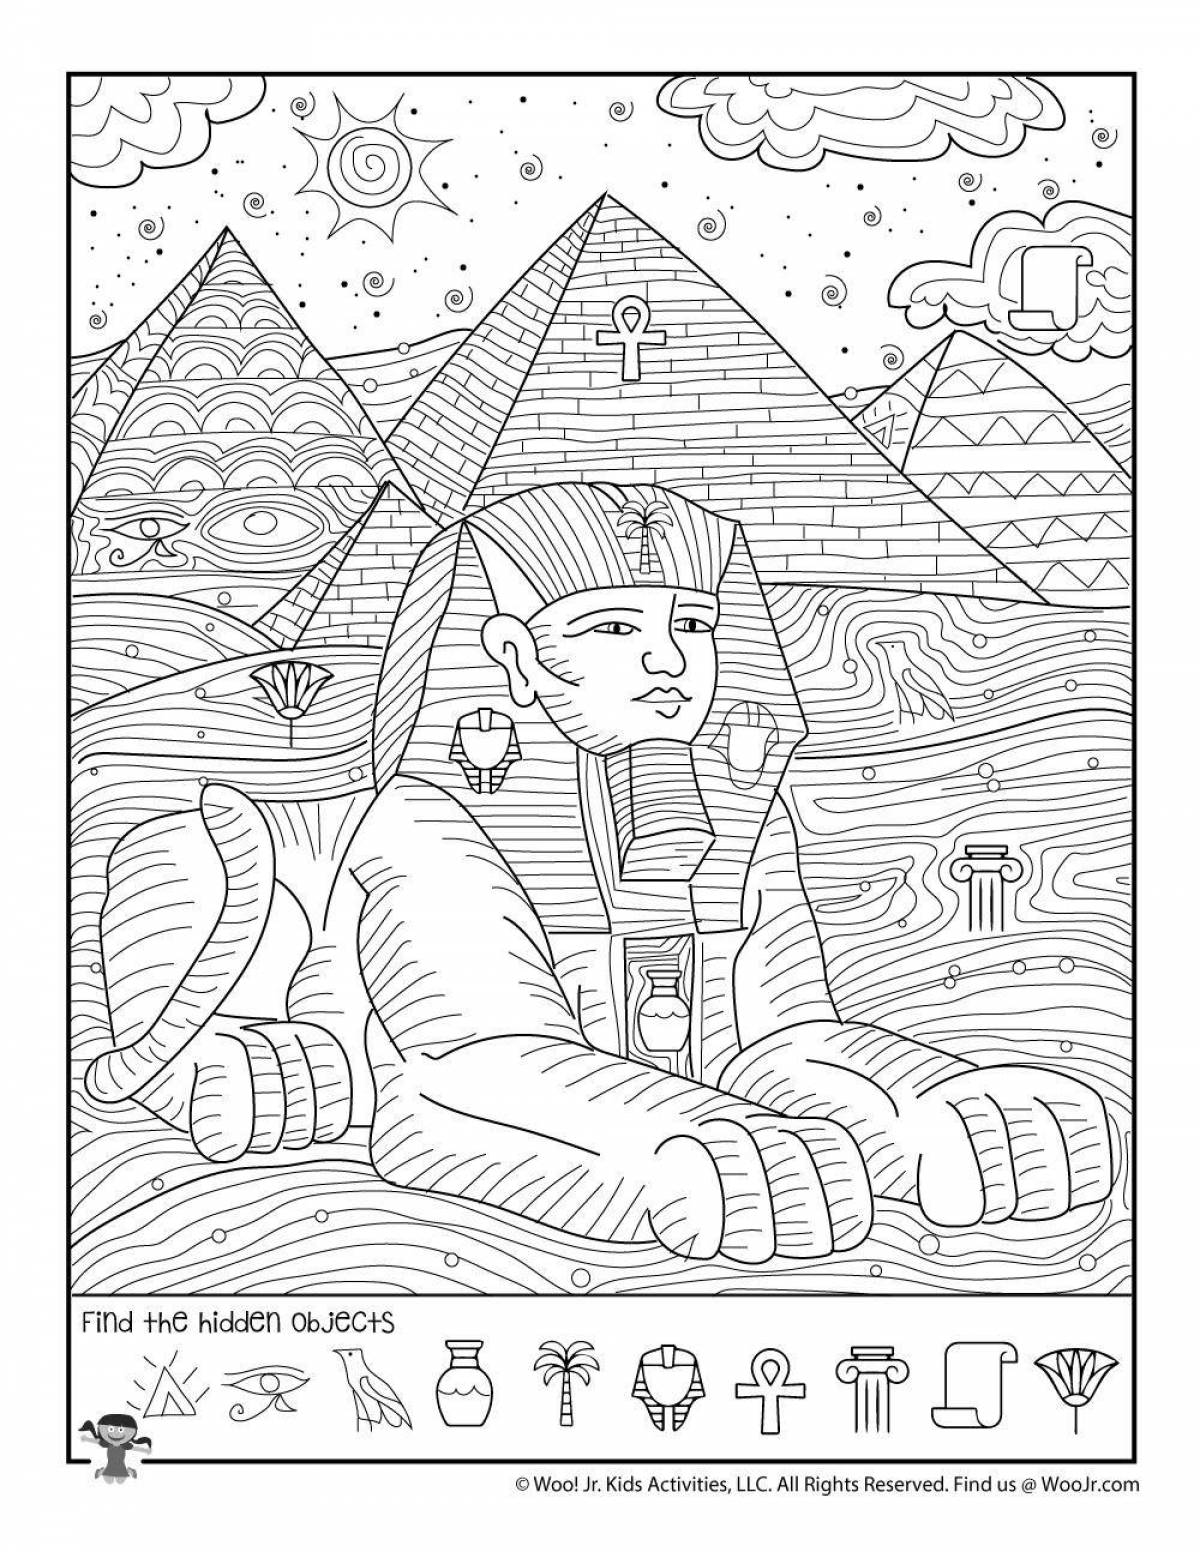 Glorious sphinx egypt coloring book